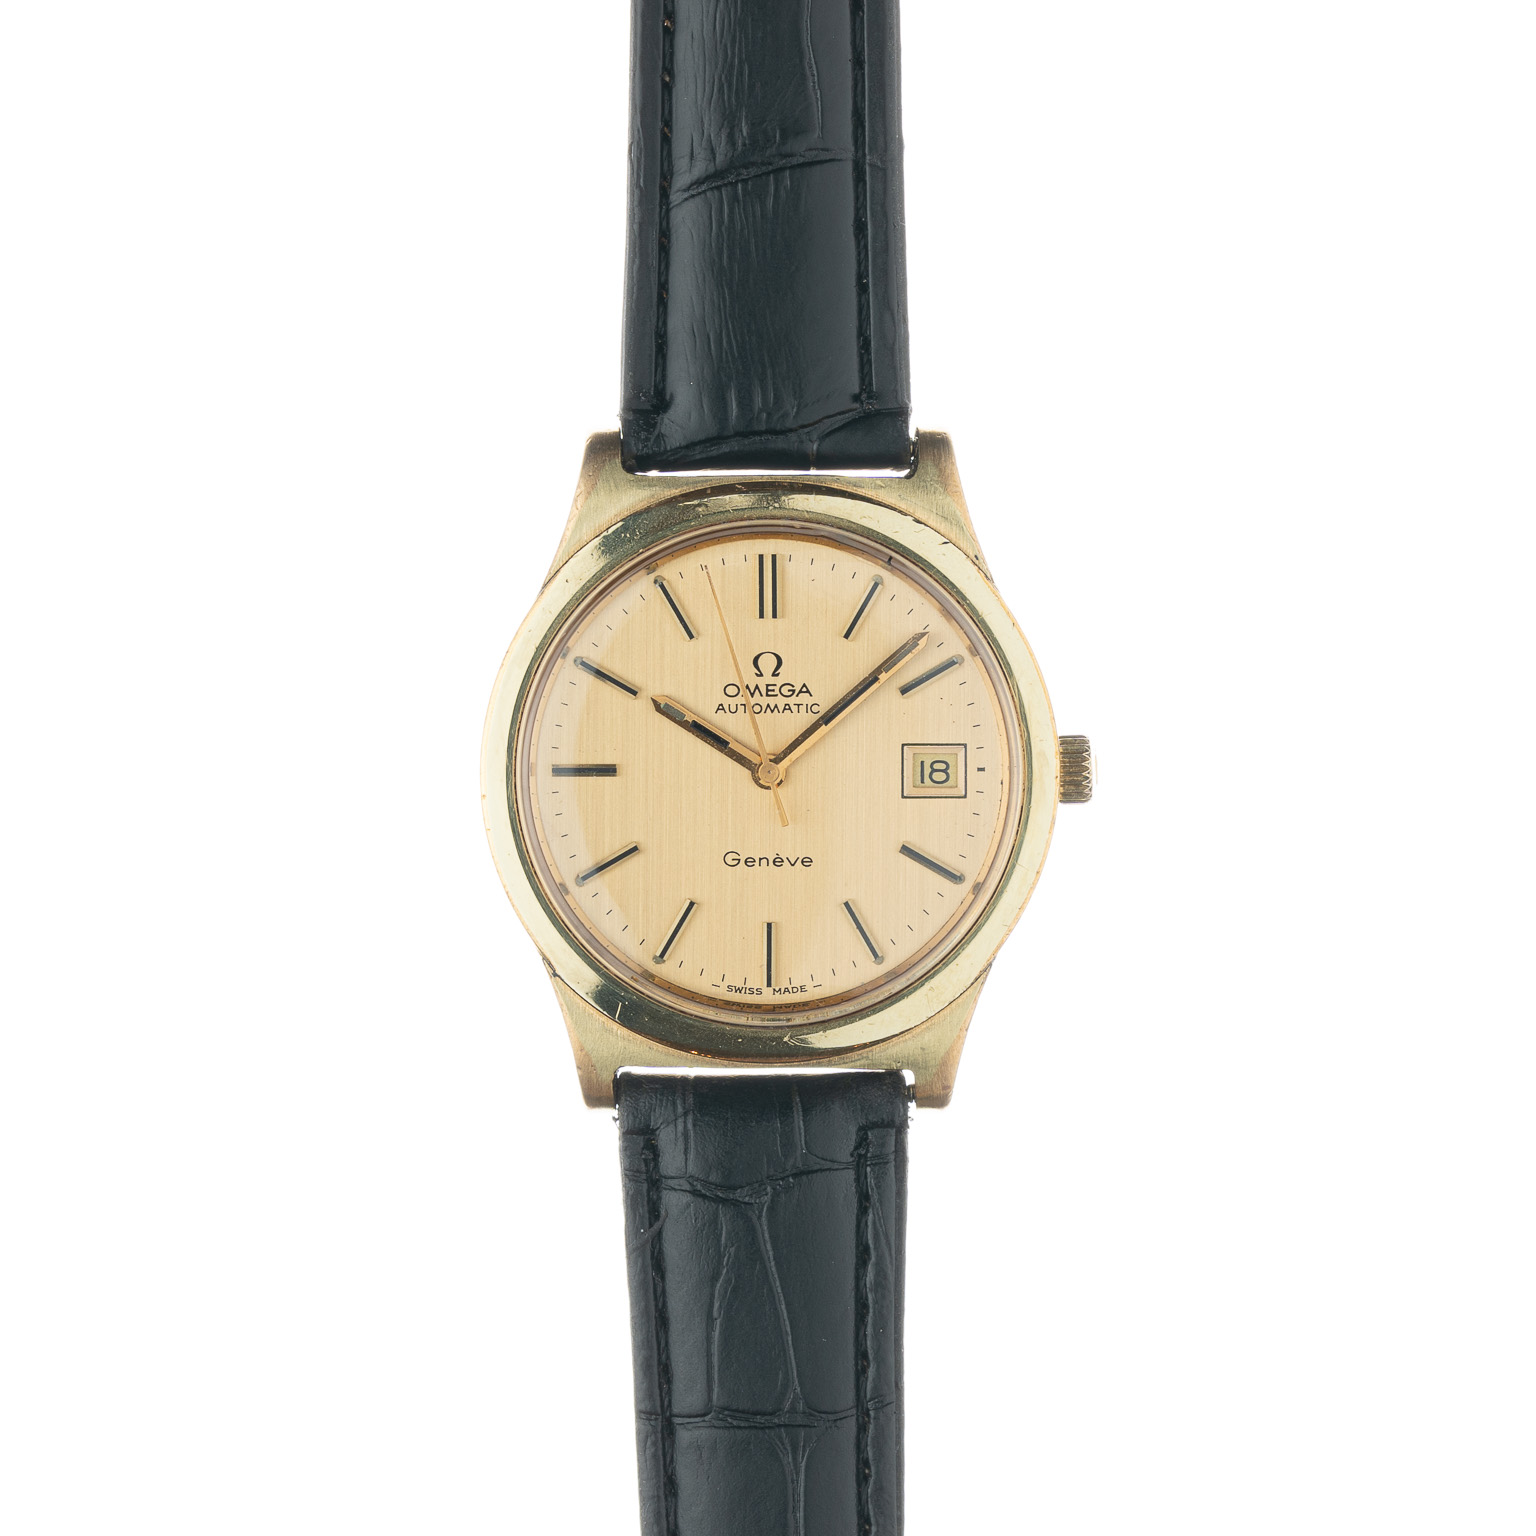 Omega Genève 166.0173 from 1973 watch